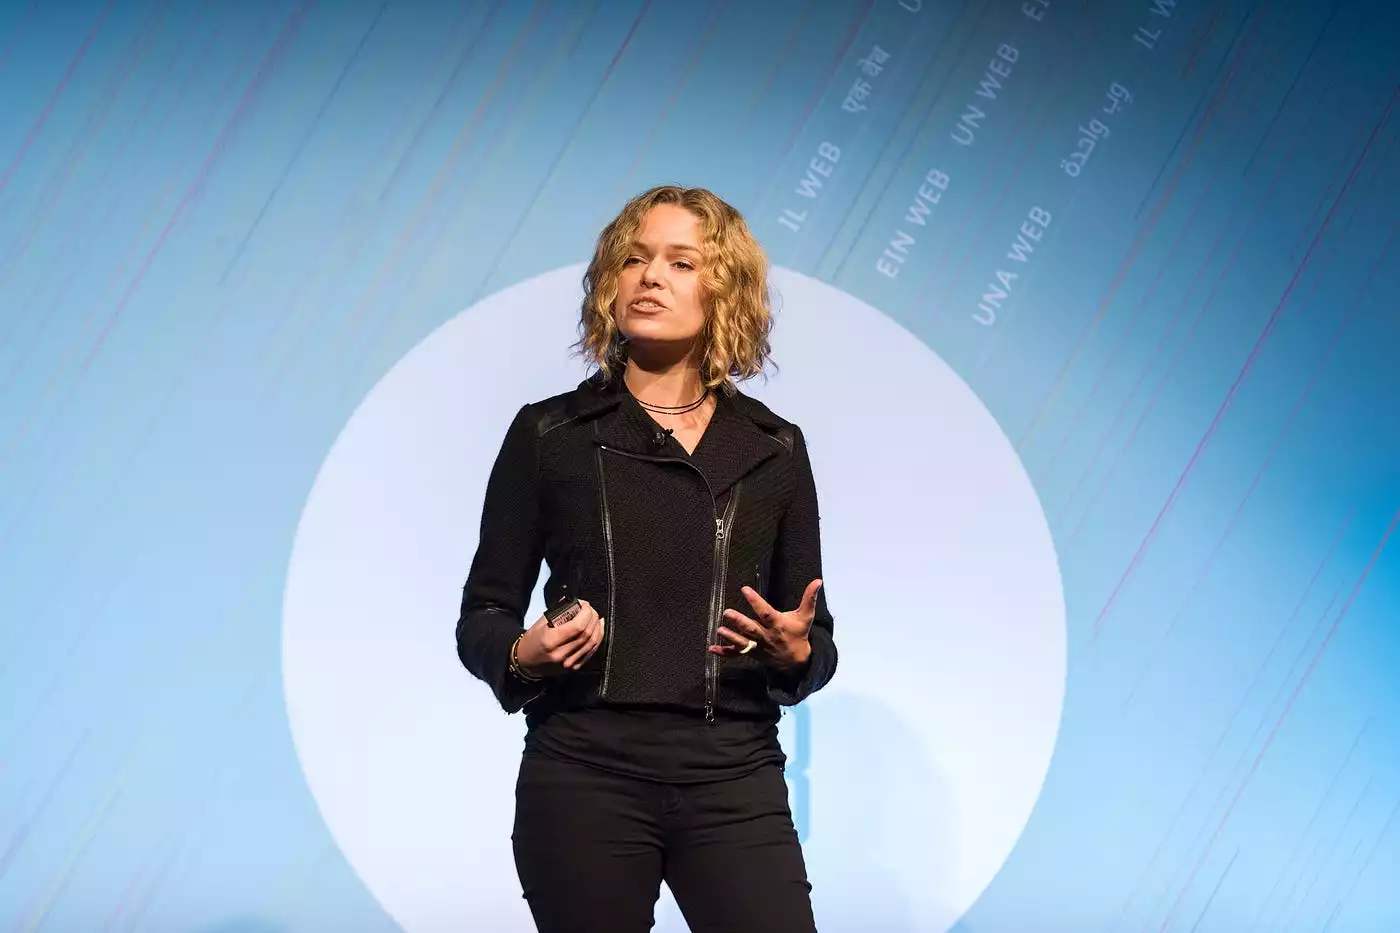 katherine-maher-named-as-new-ceo-of-web-summit-after-row-over-israel-hamas-war